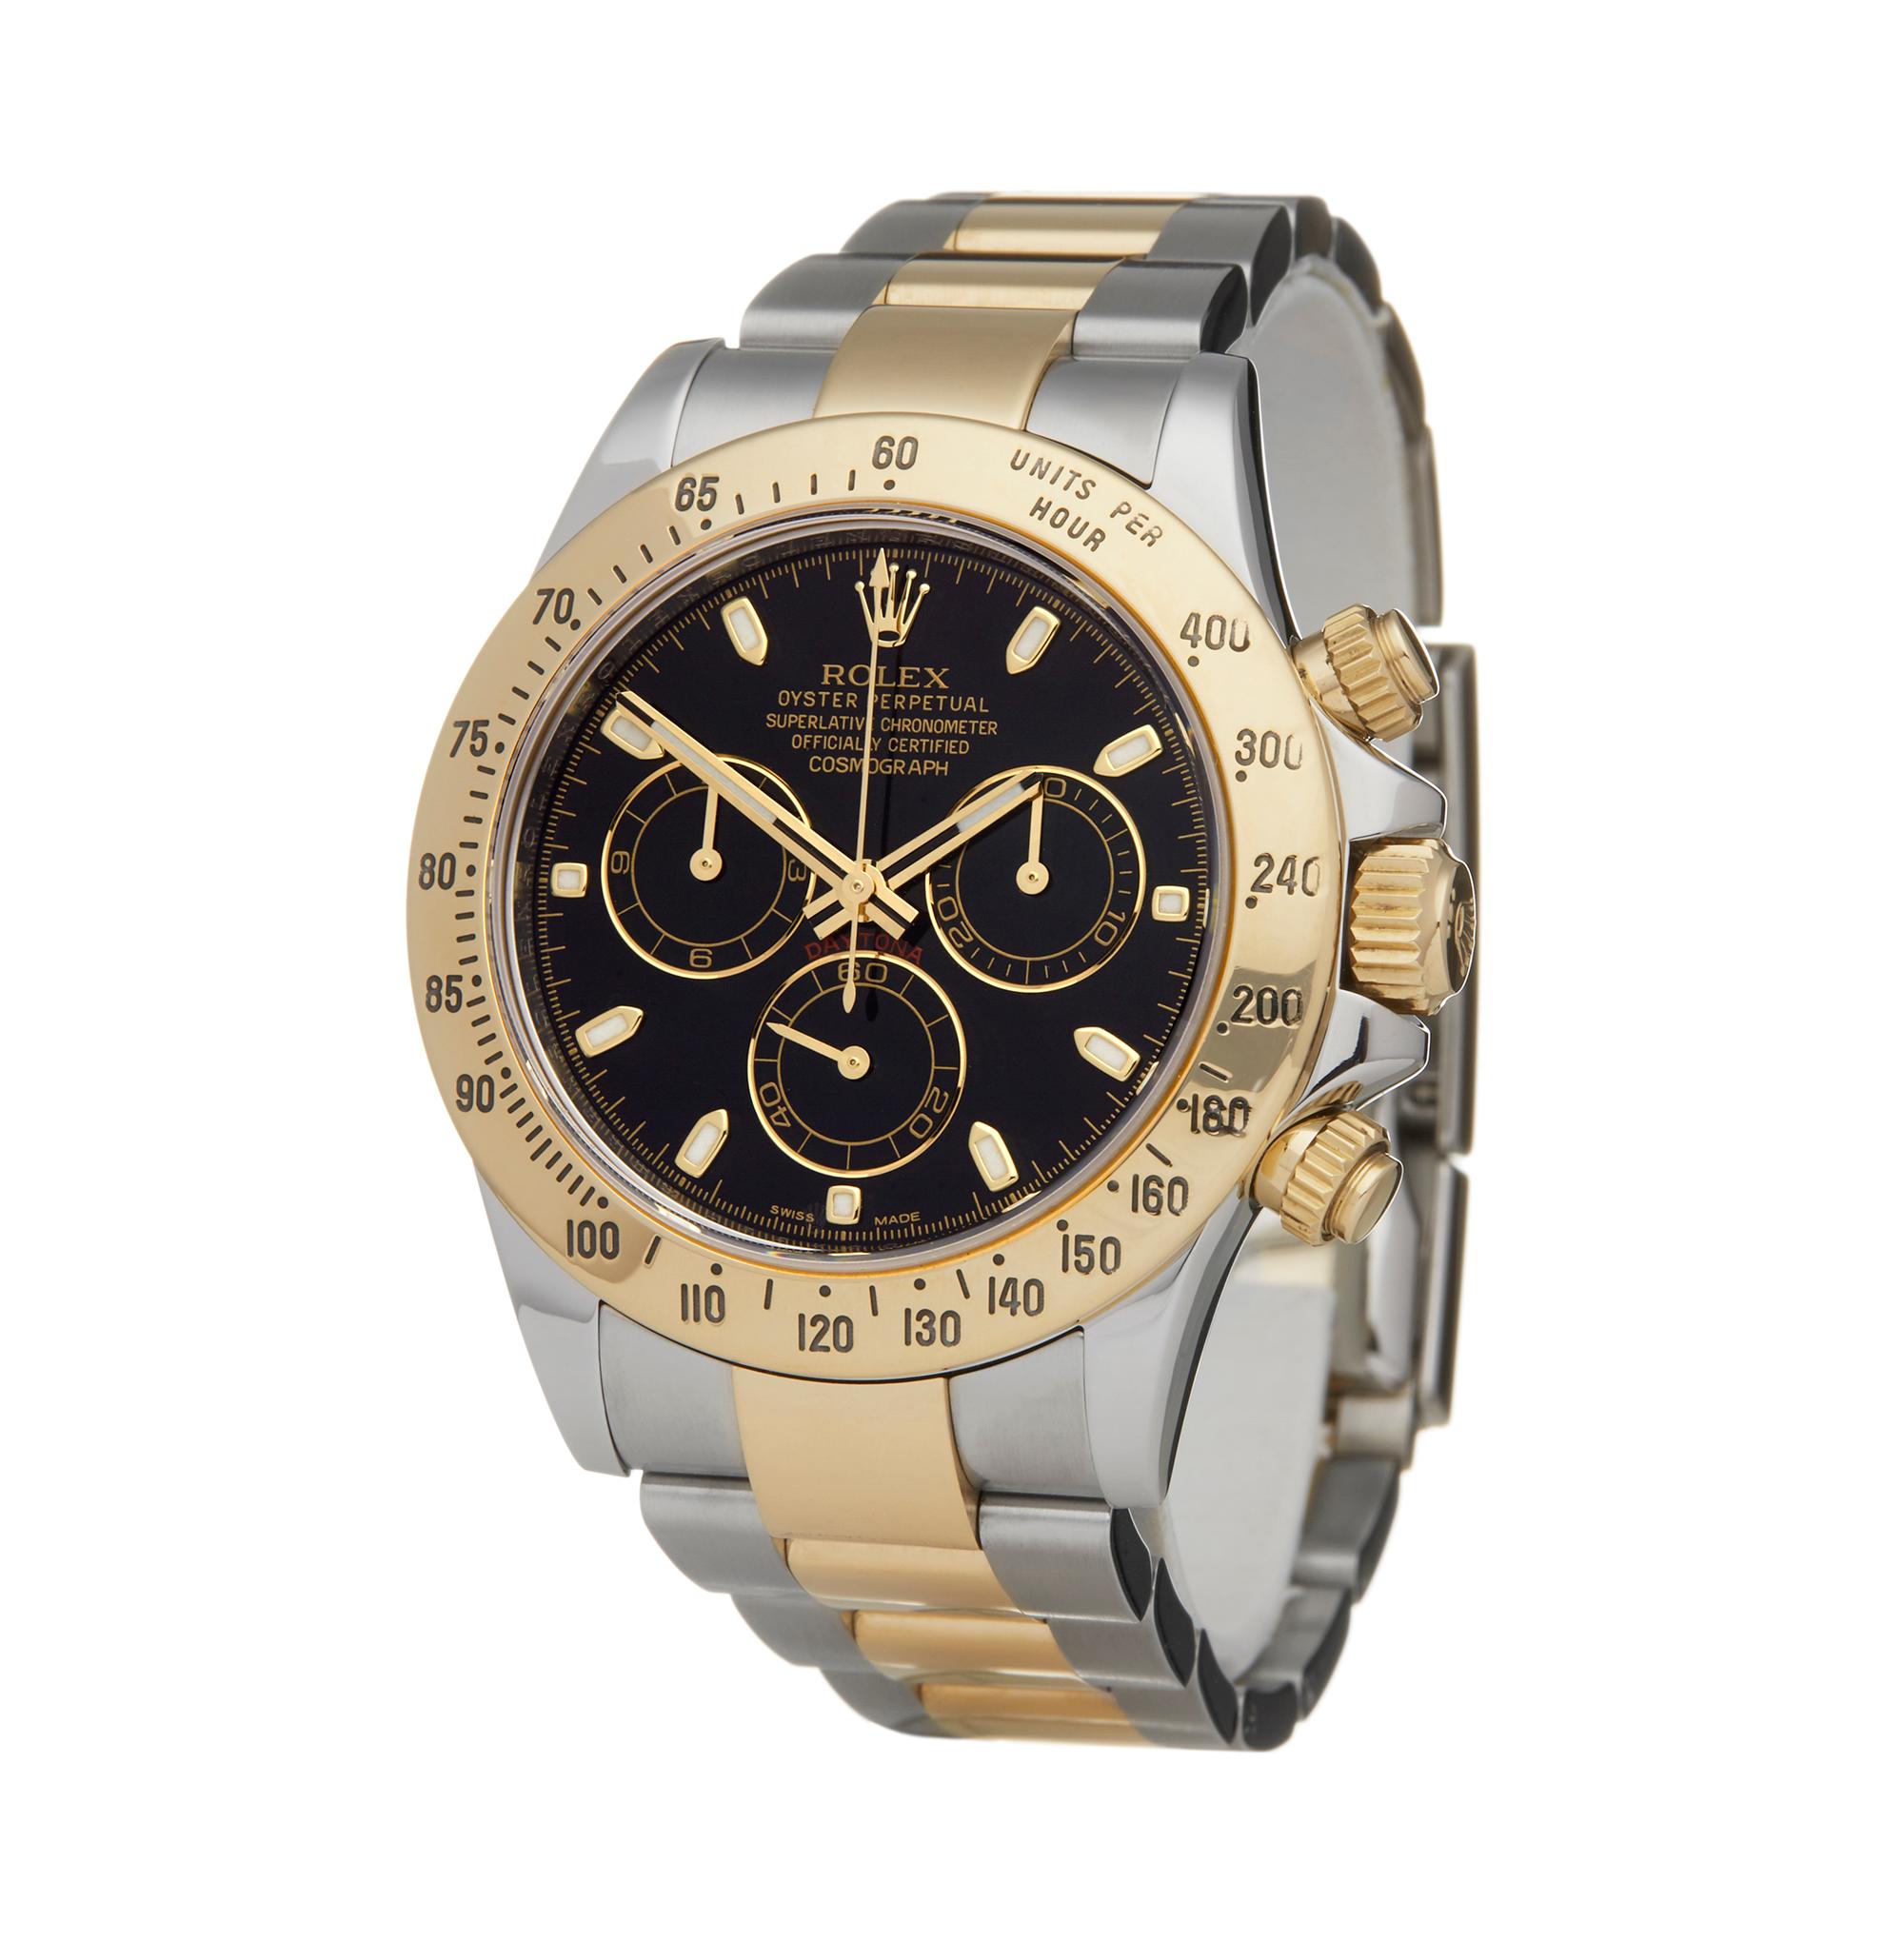 Reference: W5927
Manufacturer: Rolex
Model: Daytona
Model Reference: 116523
Age: 22nd April 2015
Gender: Men's
Box and Papers: Box, Manual and Guarantee
Dial: Black Baton
Glass: Sapphire Crystal
Movement: Automatic
Water Resistance: To Manufacturers